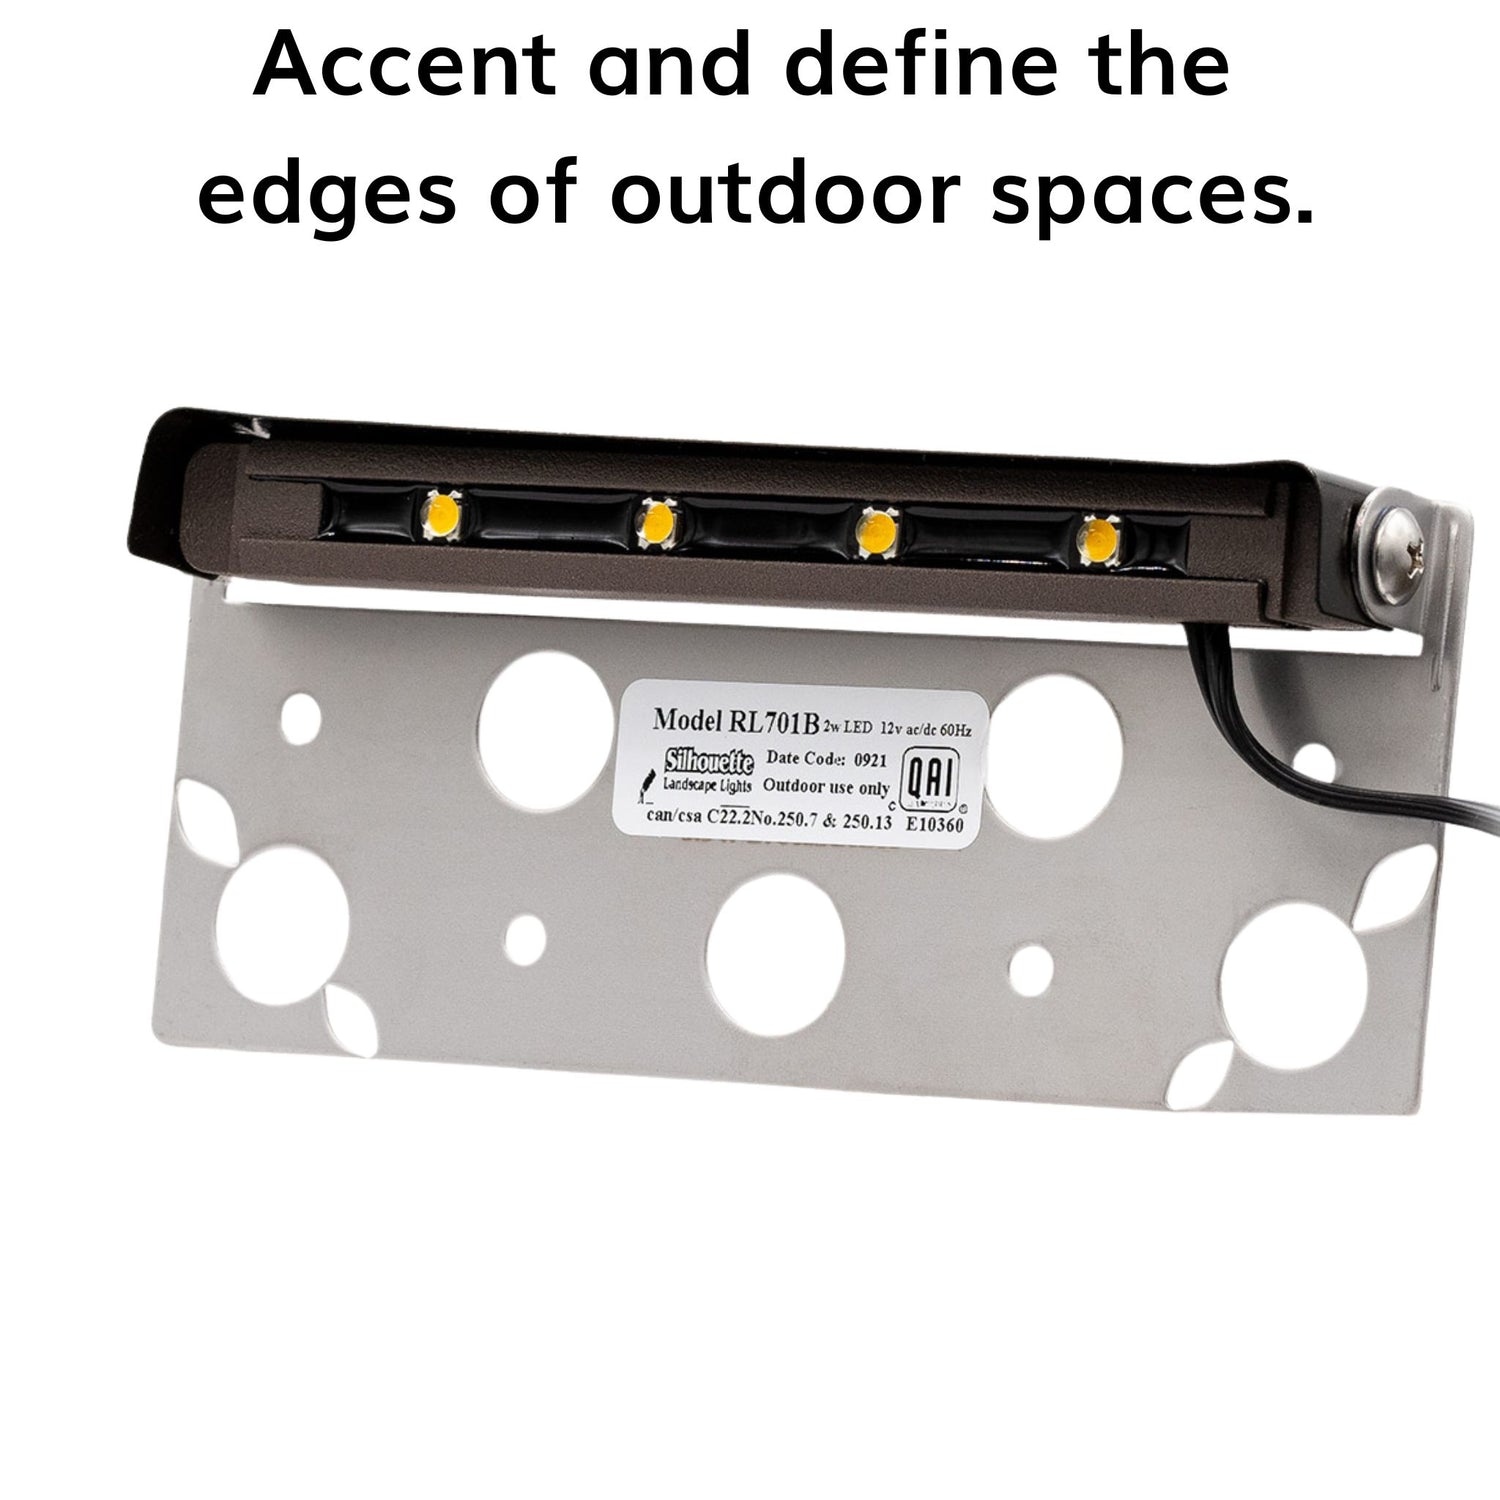 Accent and define the edges of outdoor spaces with LED Rail Lights.